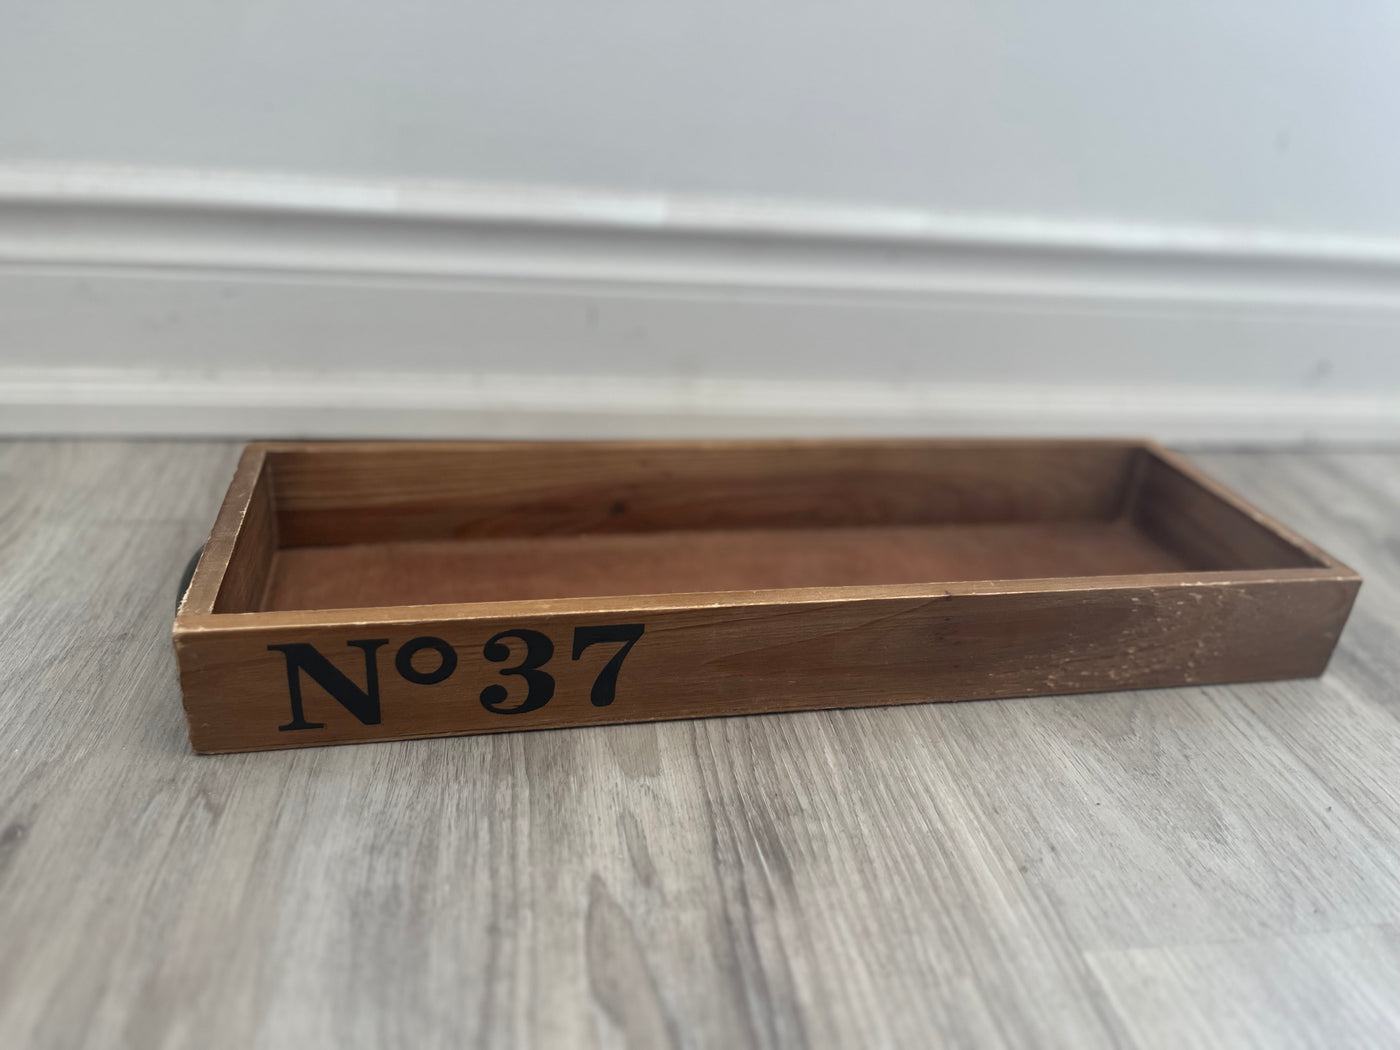 Wooden Tray with metal handles